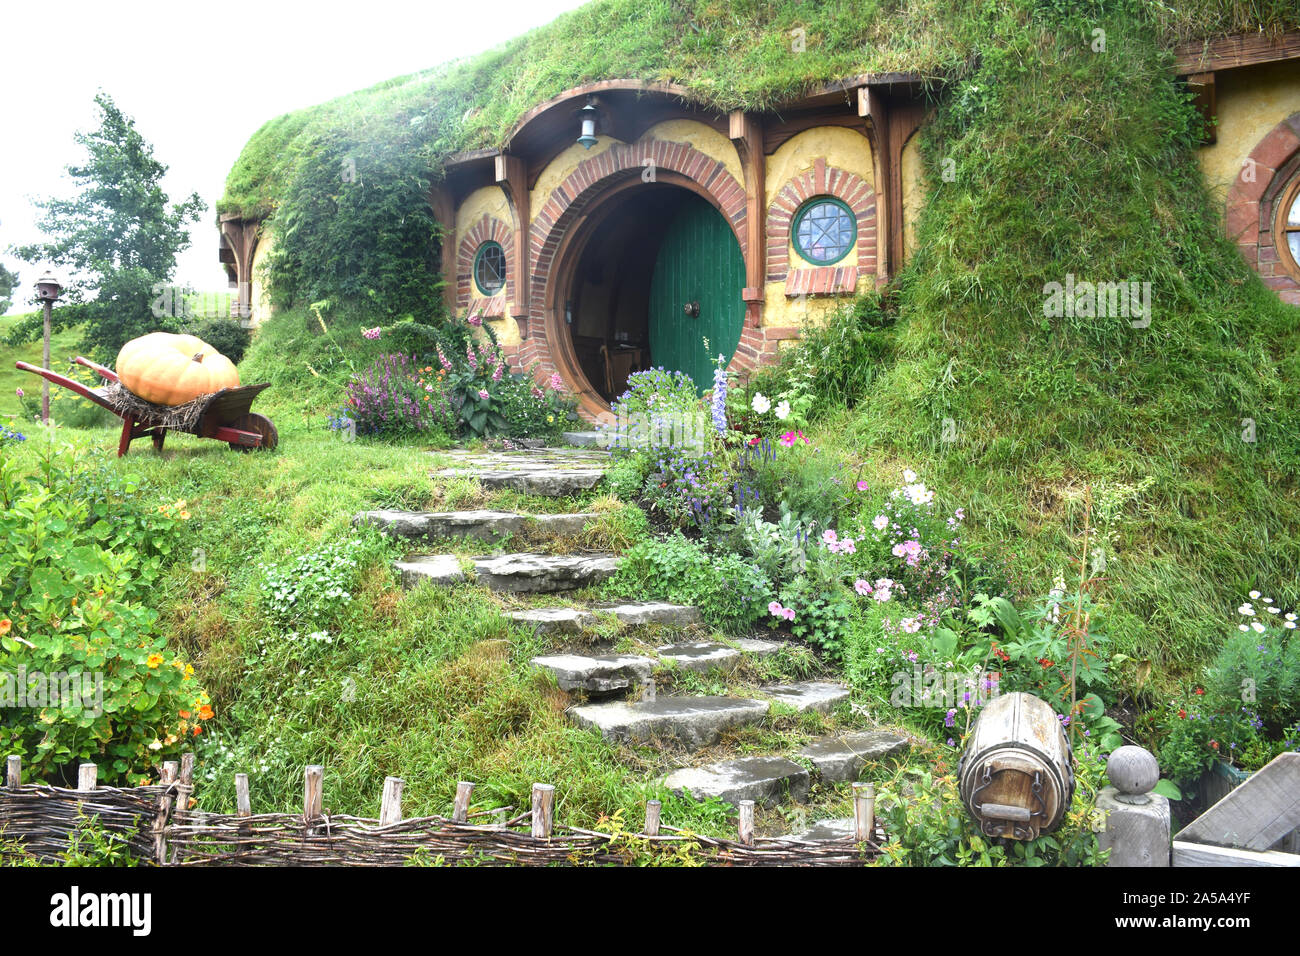 The Hobbit-house of Frodo in the Shire, in the famous place named Hobbiton: The original movie-set of 'Lord of the Rings' and the 'Hobbit-trilogies' Stock Photo